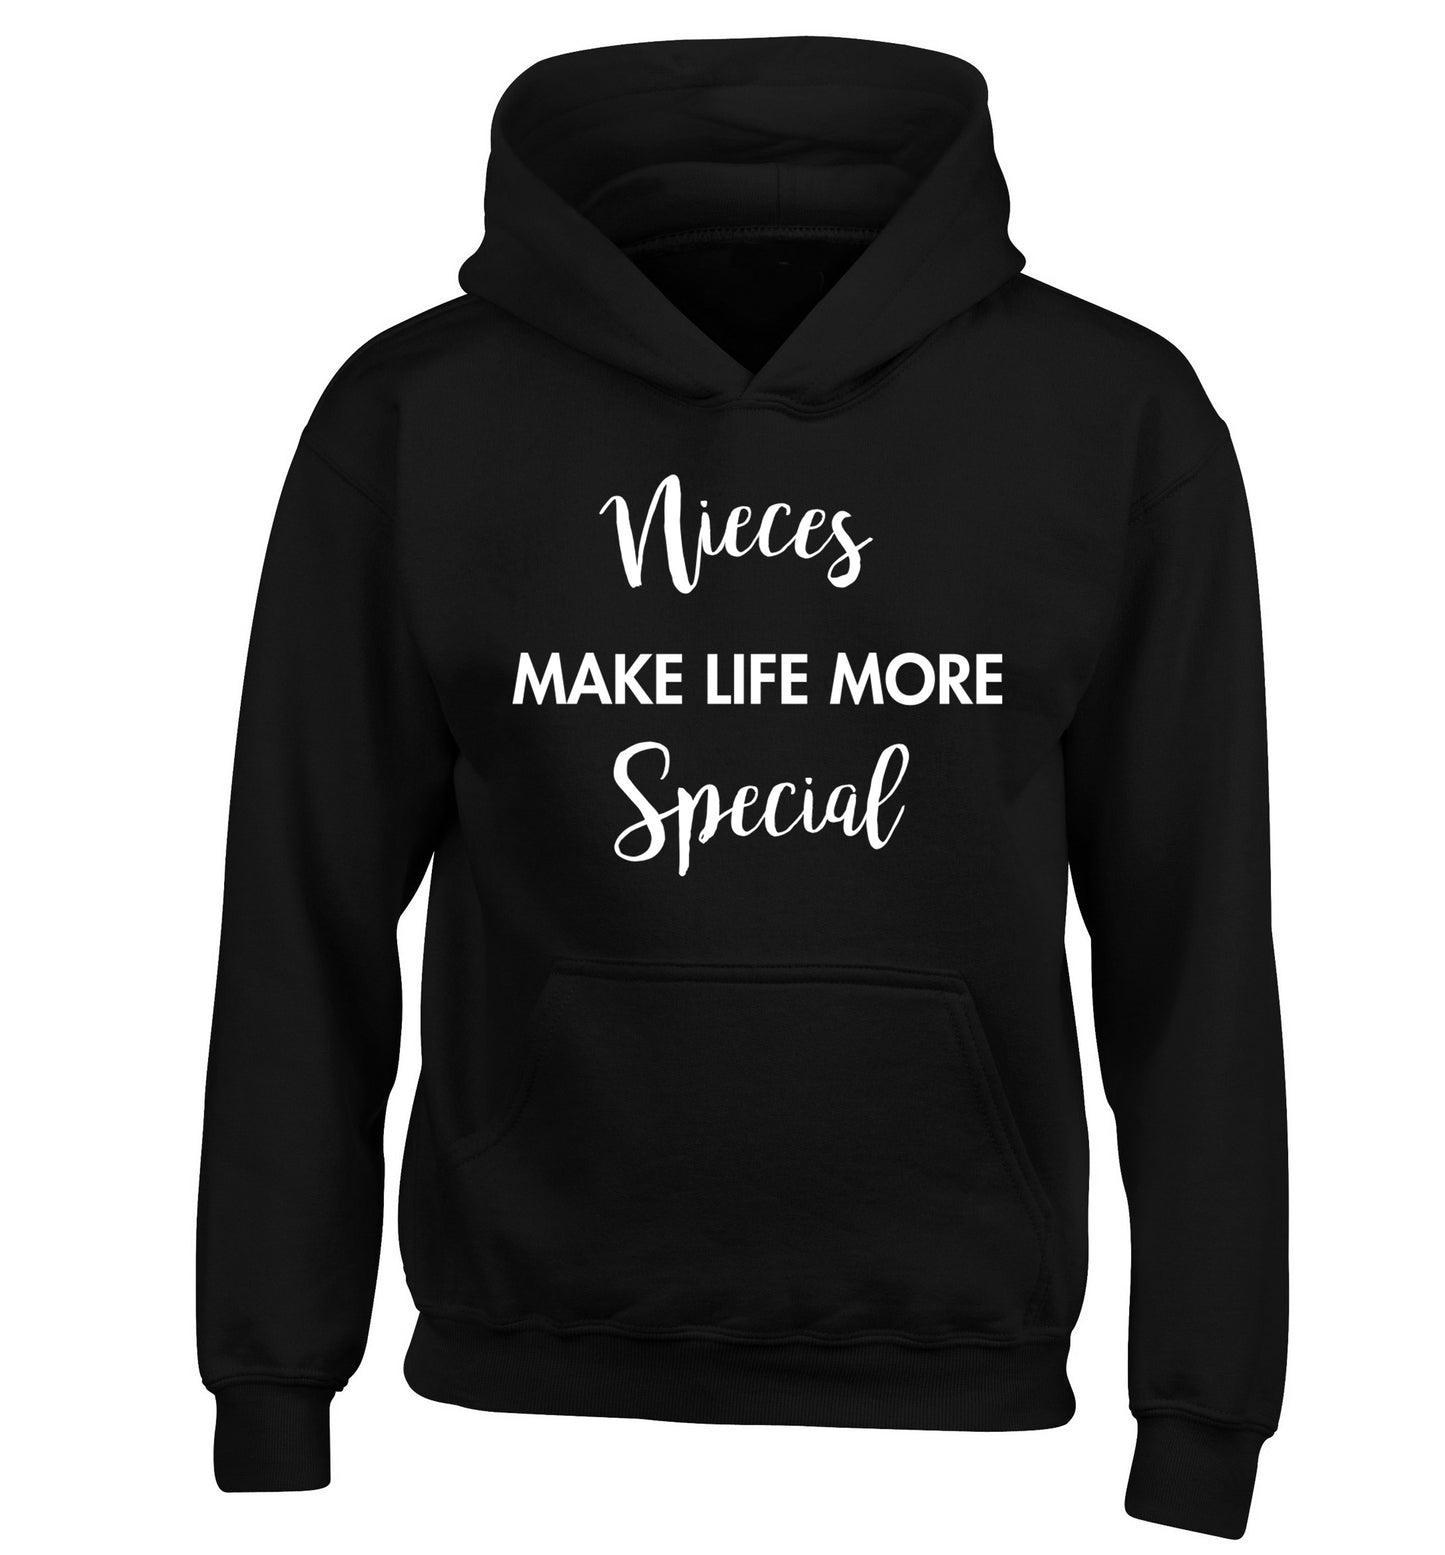 Nieces make life more special children's black hoodie 12-14 Years